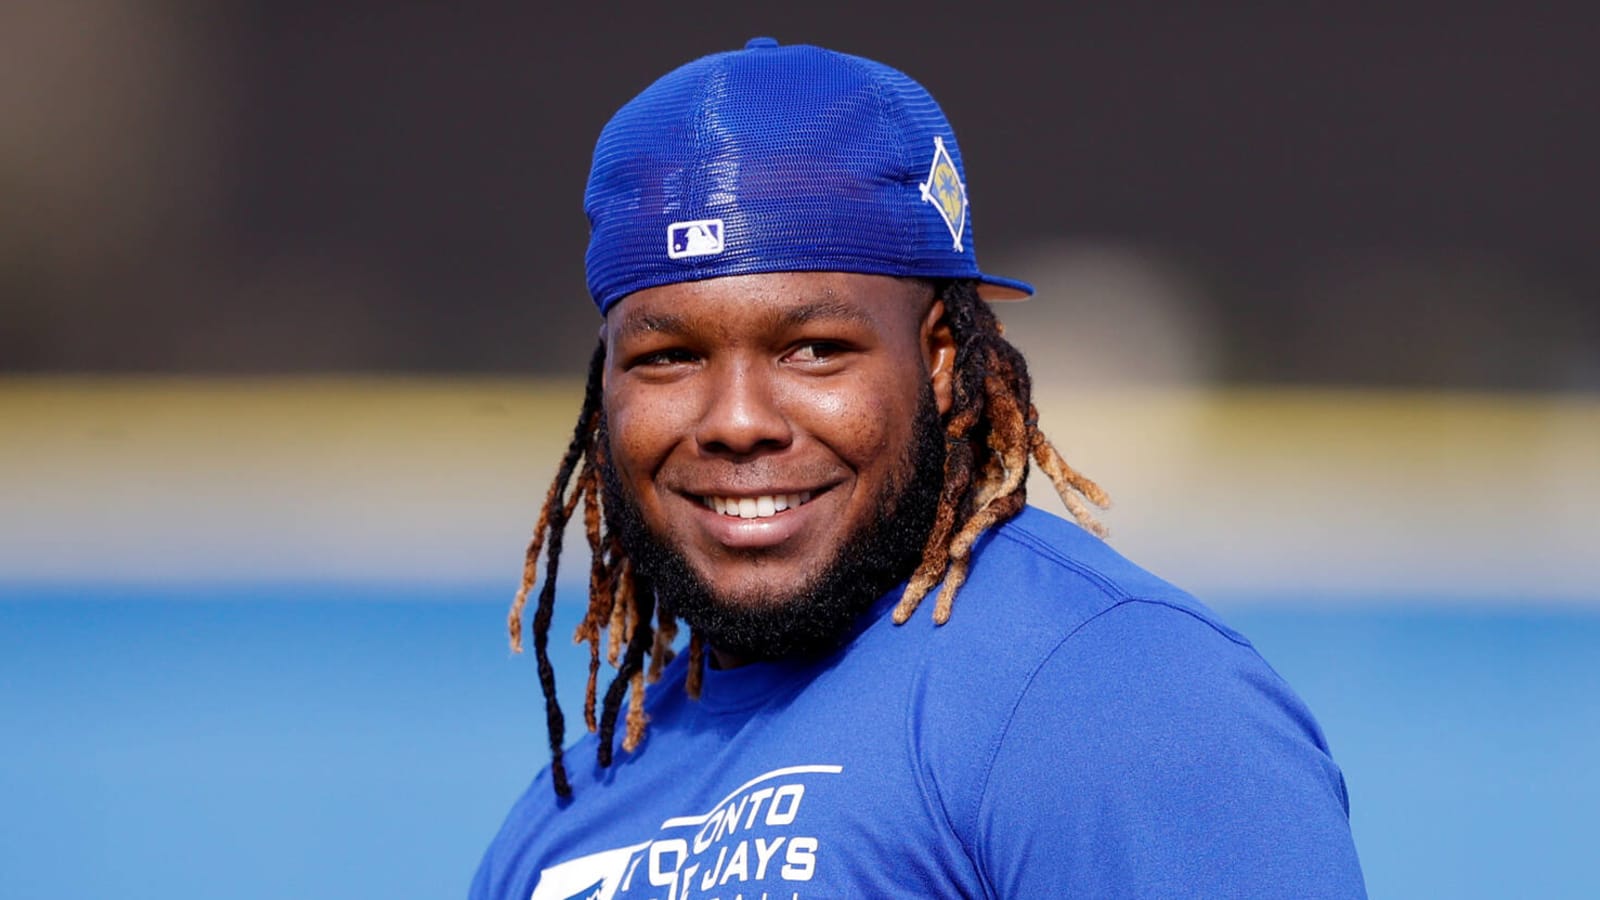 Vladimir Guerrero Jr.'s Trainer and Grandmother Helped With Weight